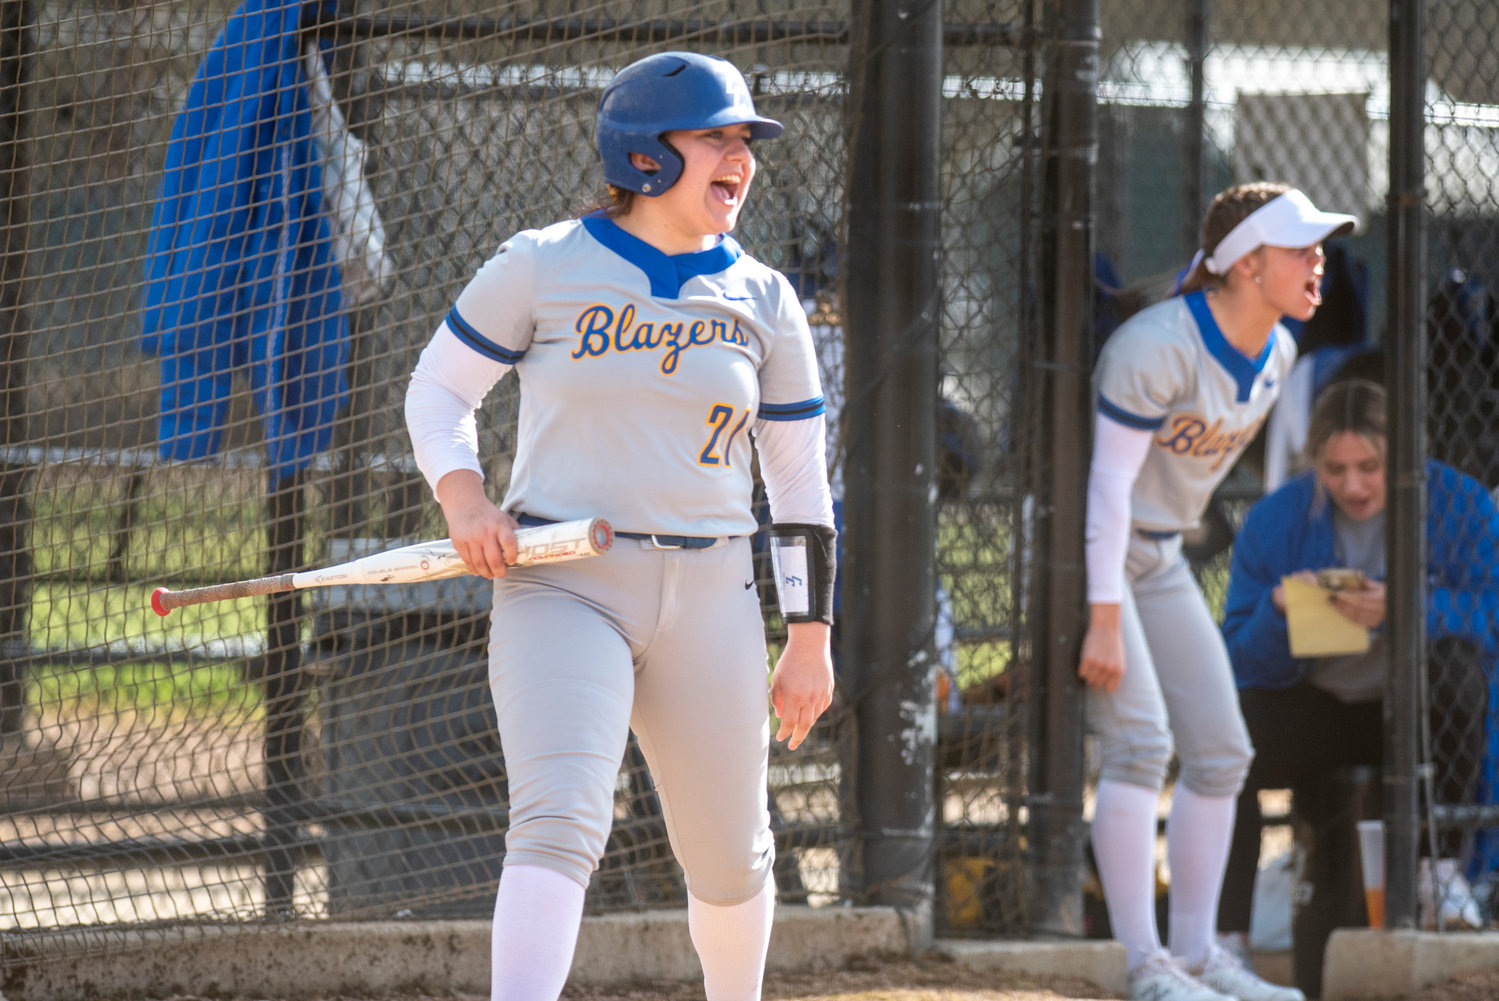 Centralia College's Kaylee Ashley (21) yells in celebratin after the Blazers' hit an RBI double against Chemeketa on March 25.